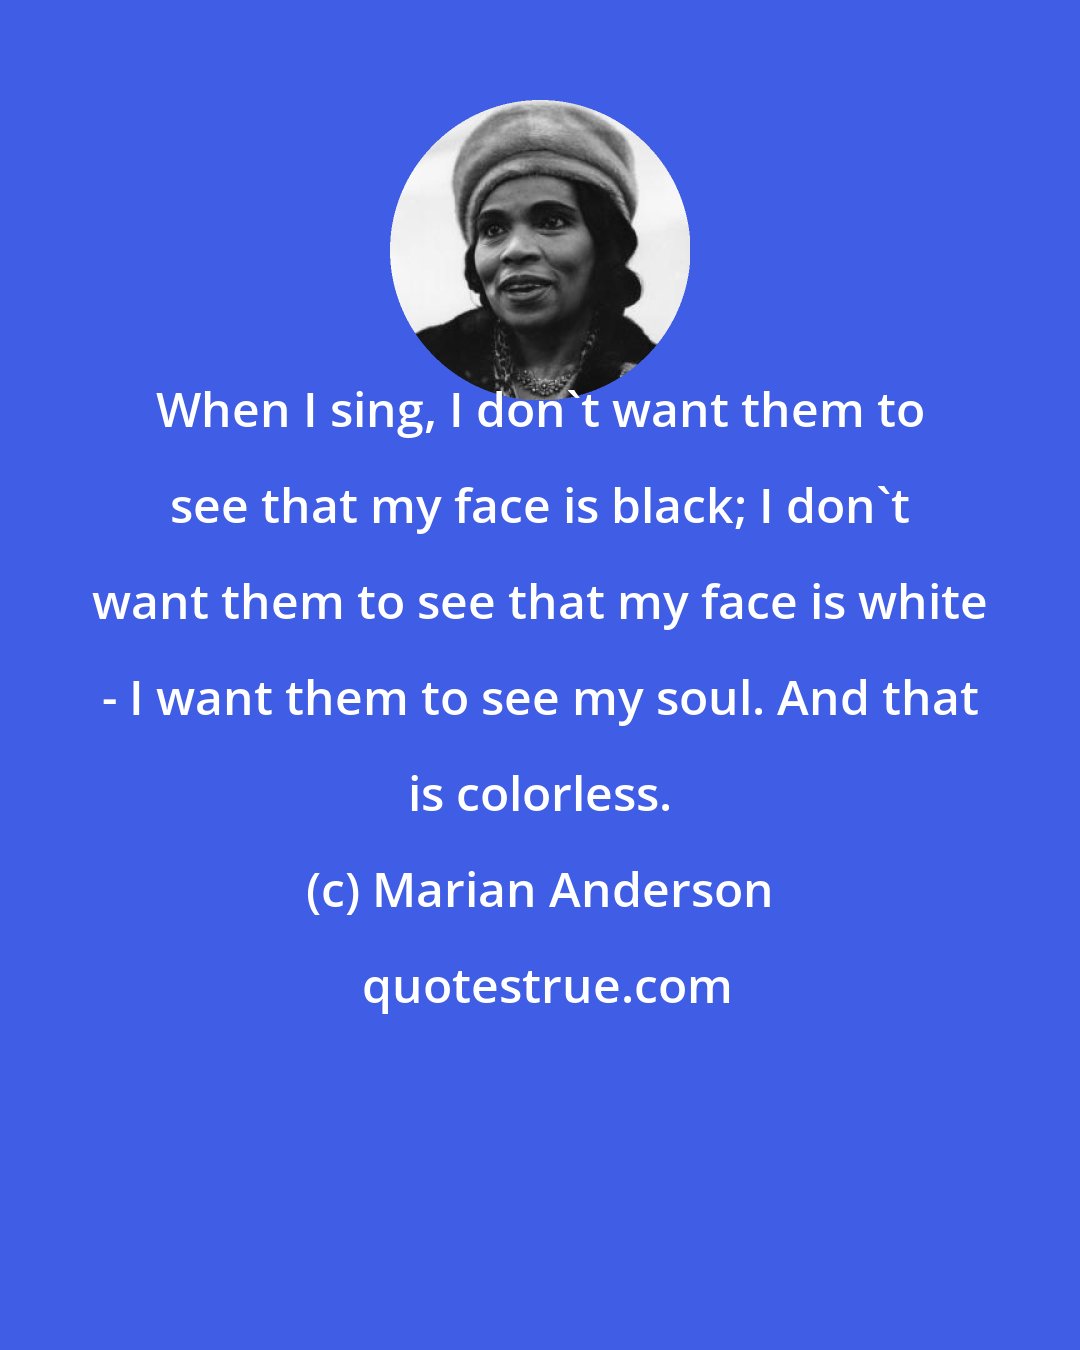 Marian Anderson: When I sing, I don't want them to see that my face is black; I don't want them to see that my face is white - I want them to see my soul. And that is colorless.